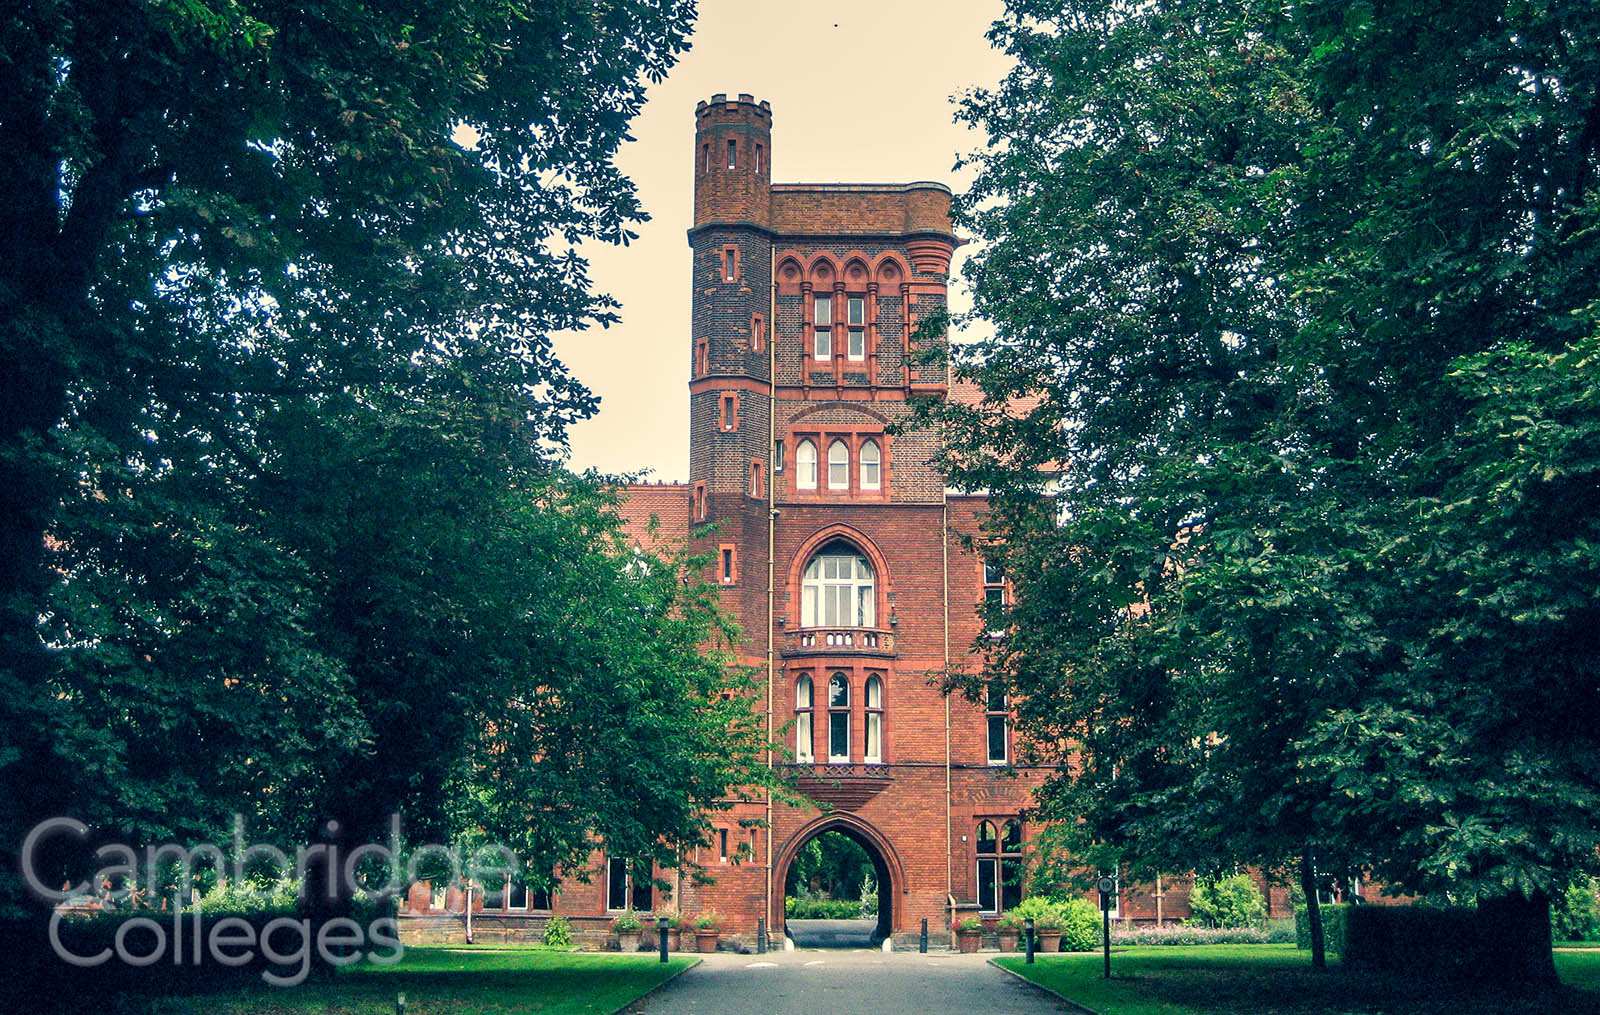 The main entrance to Girton College, viewed from Huntingdon road